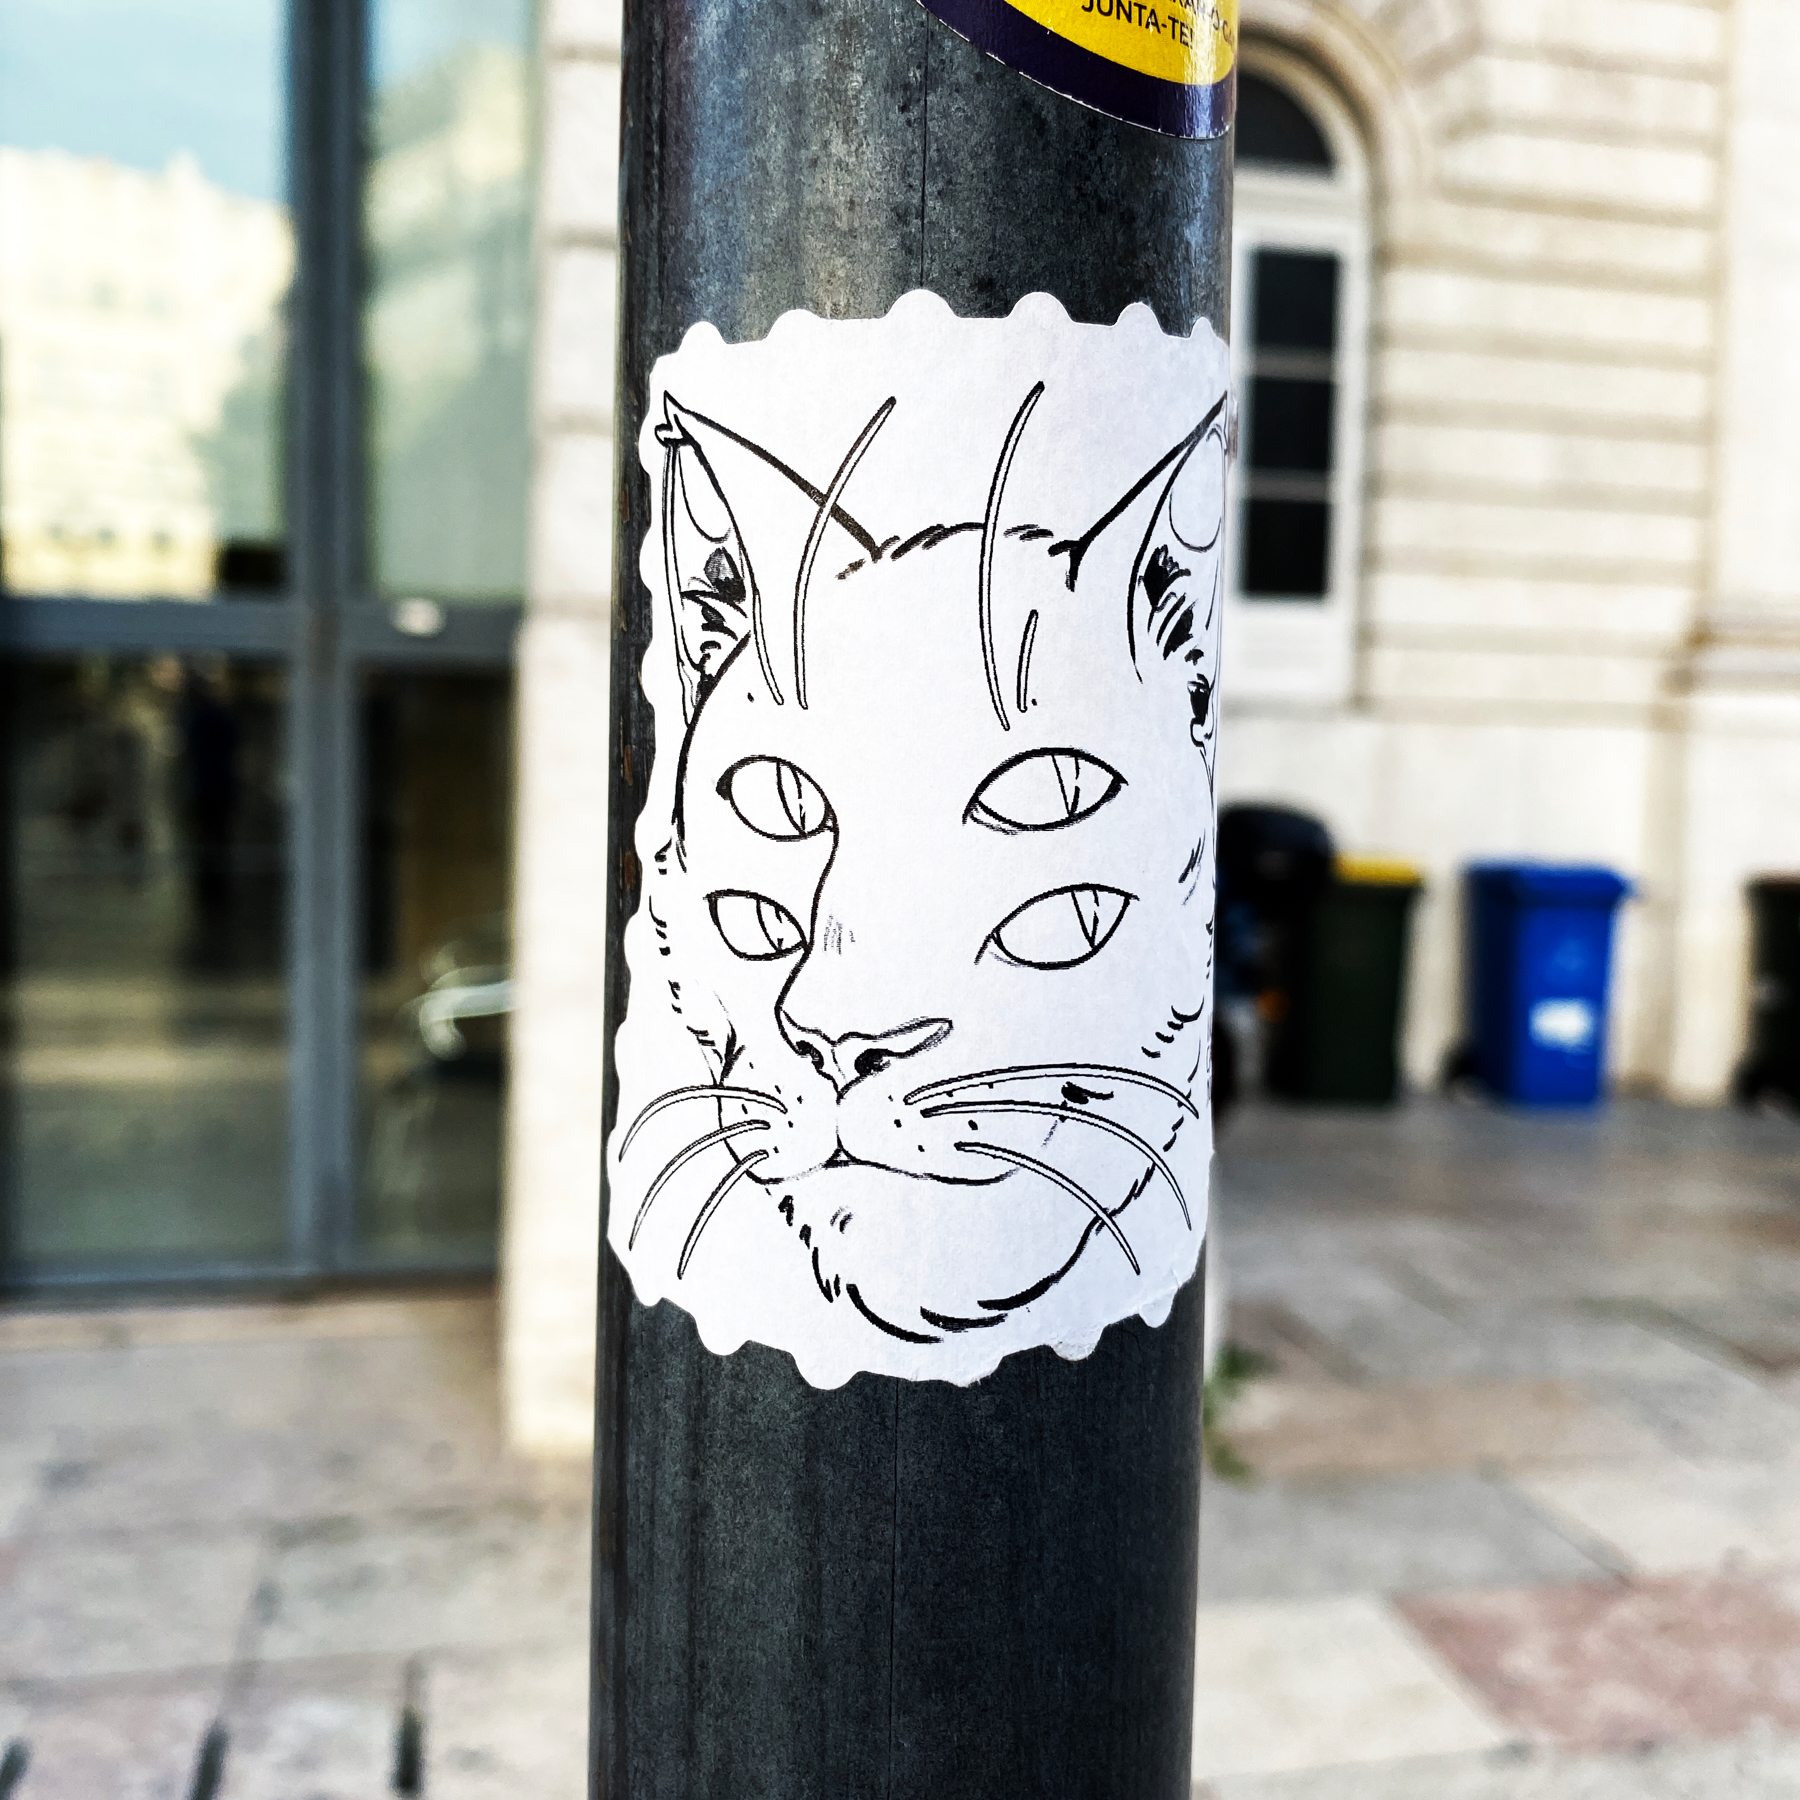 Sticker, drawing of a cat's head with four eyes, on a black post